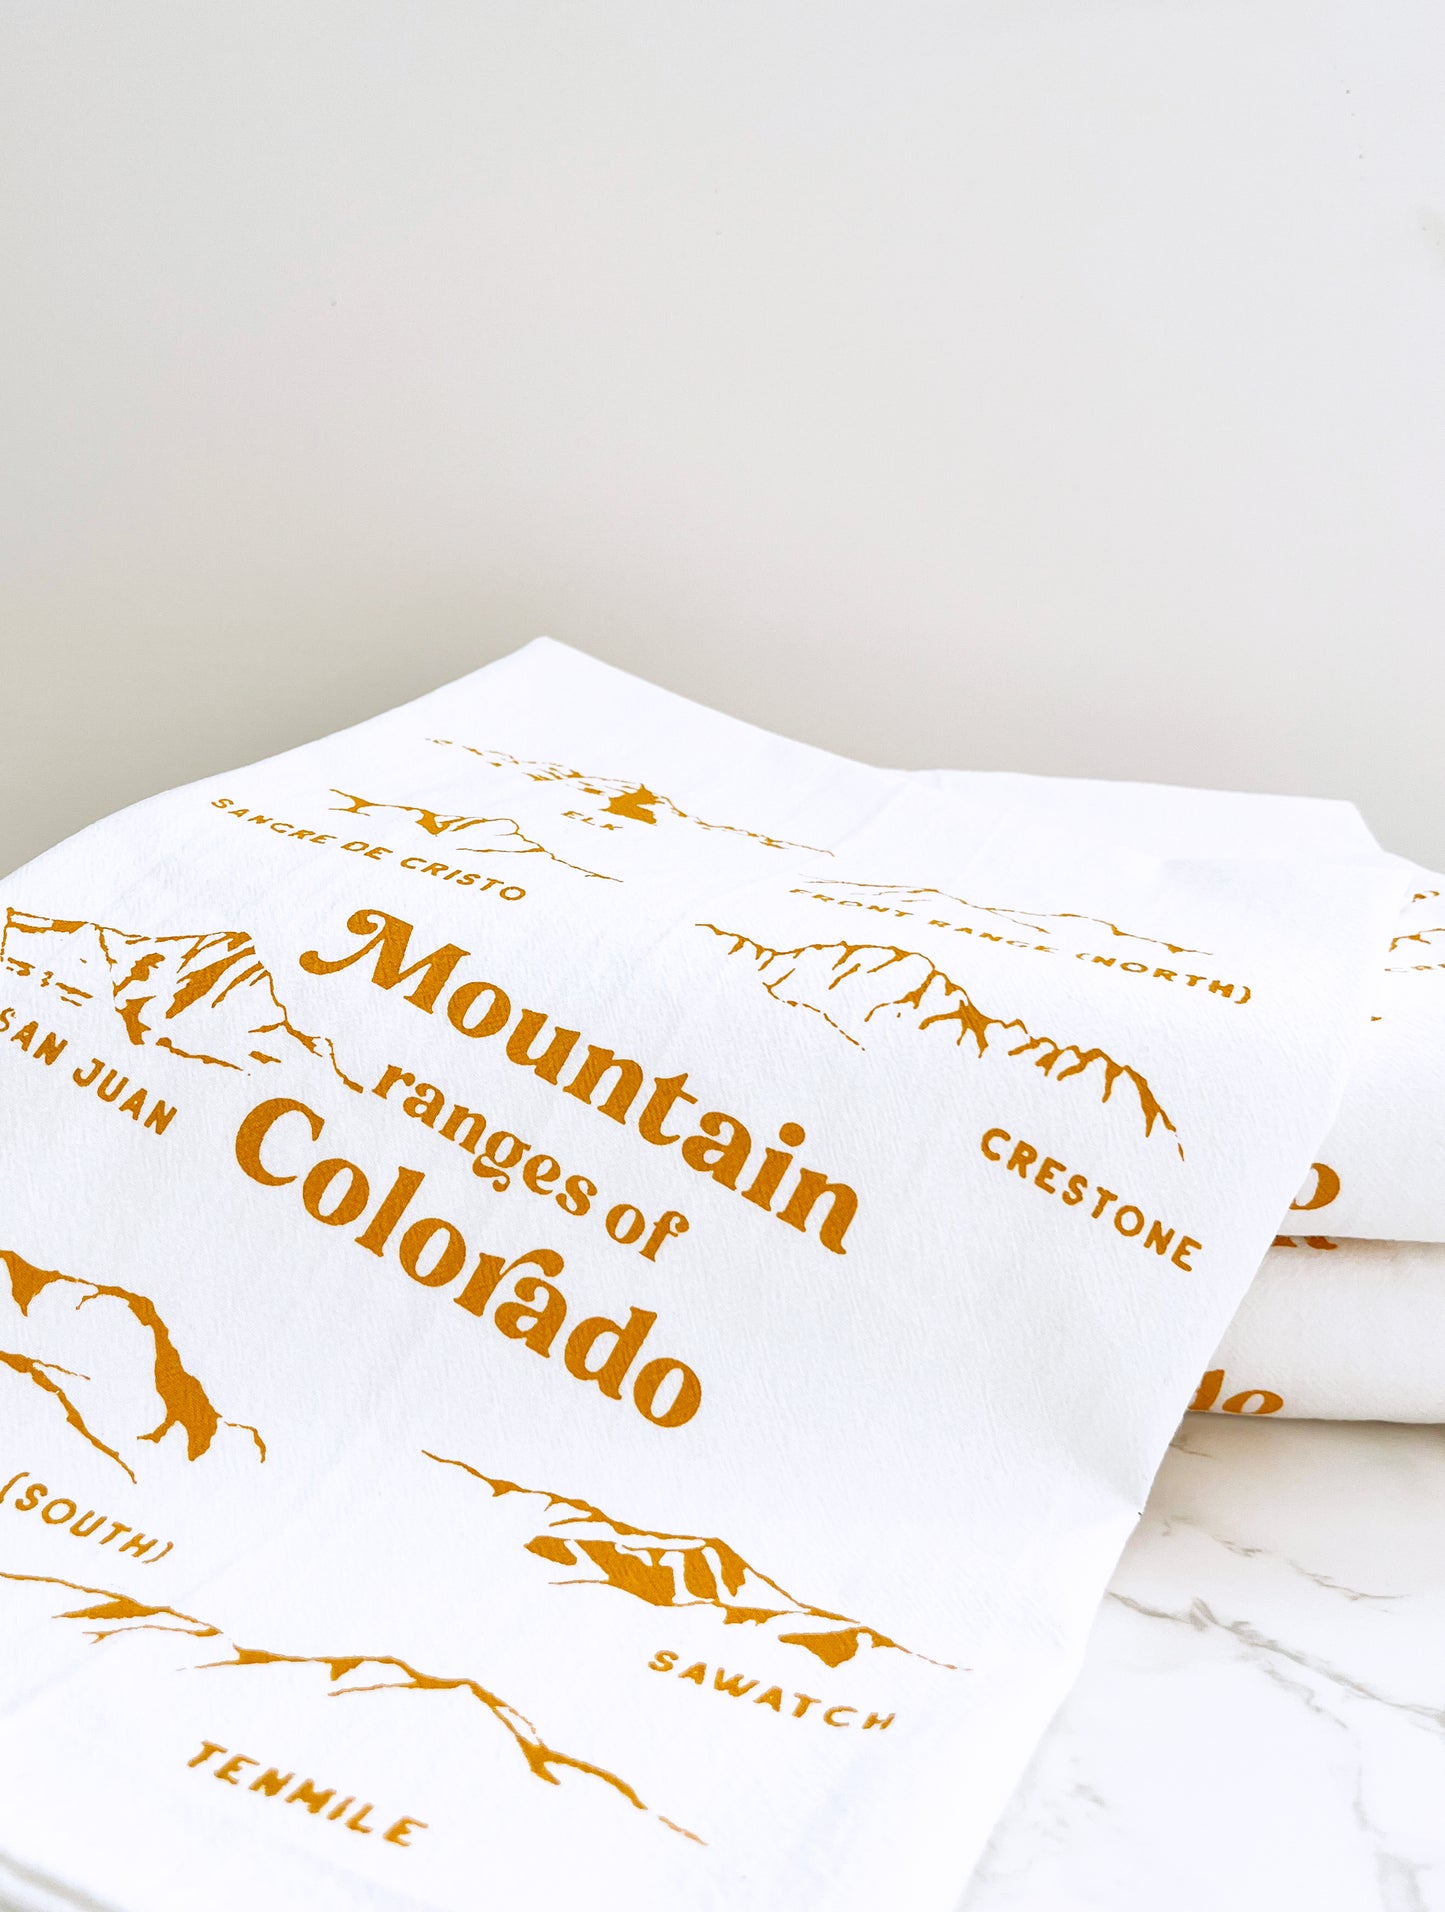 souvenir retro vintage style mountain ranges of colorado ochre screen print printed coin laundry hand illustrated